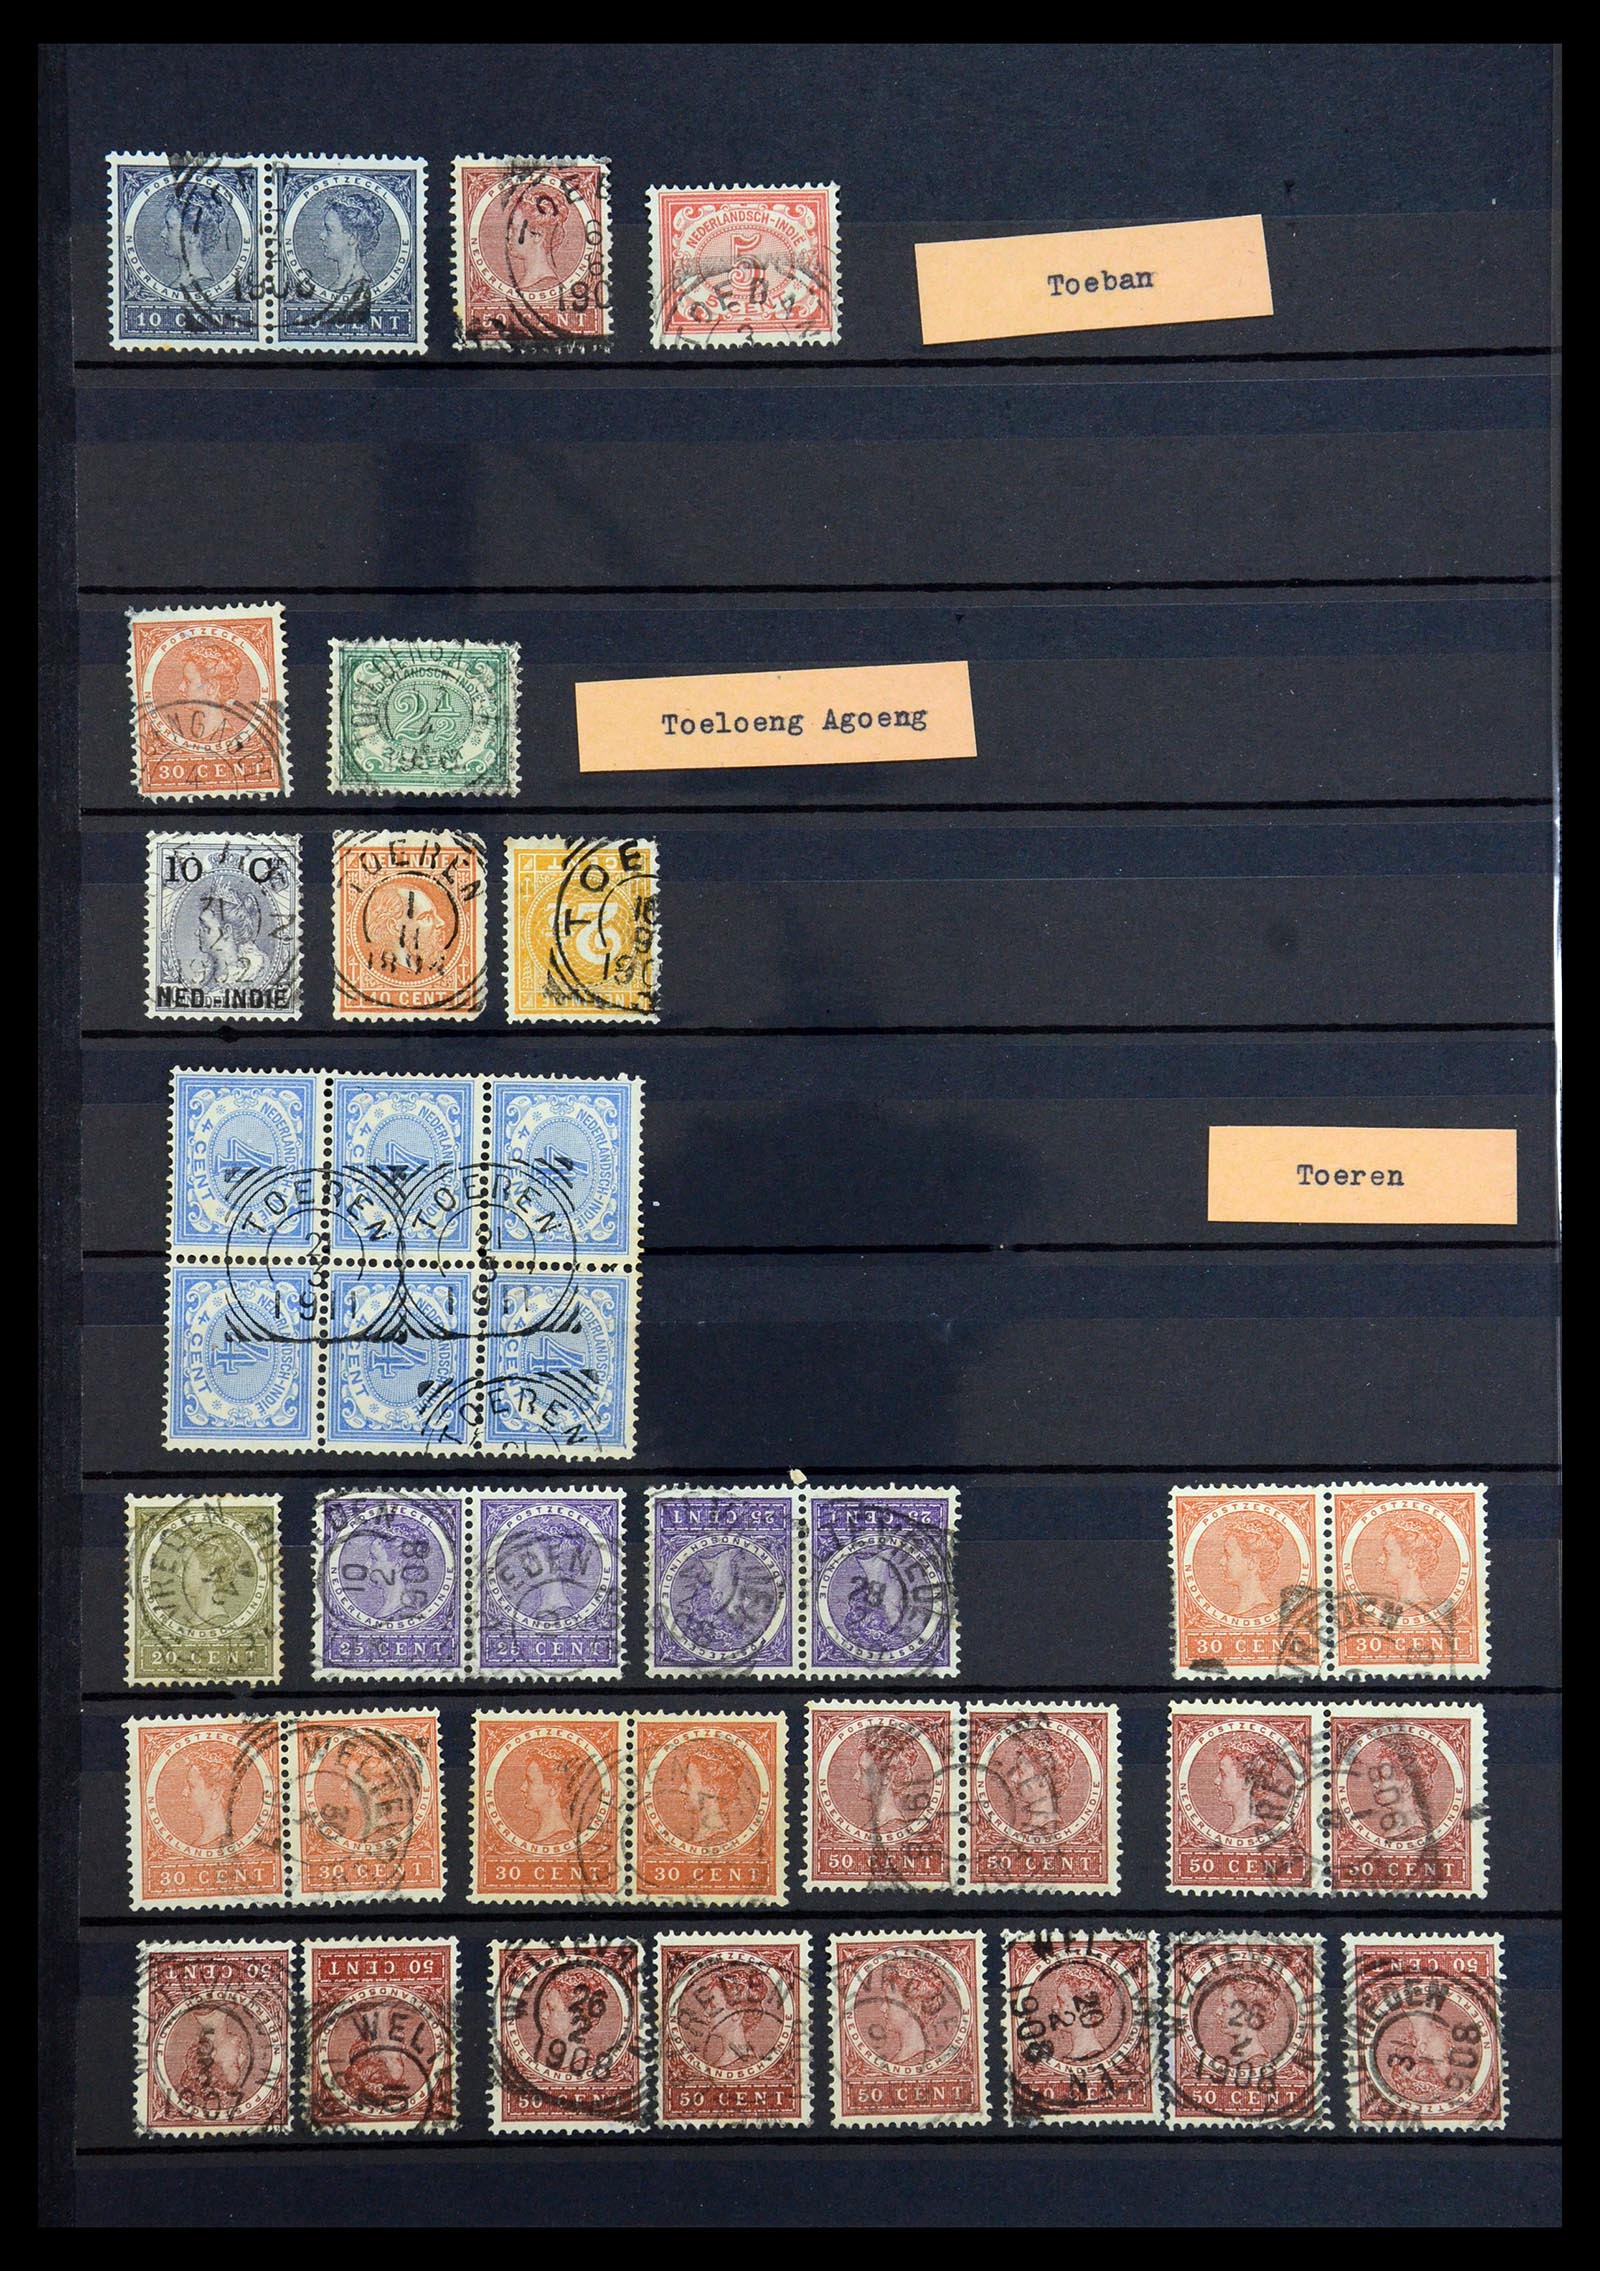 36371 058 - Stamp collection 36371 Dutch east Indies cancels.